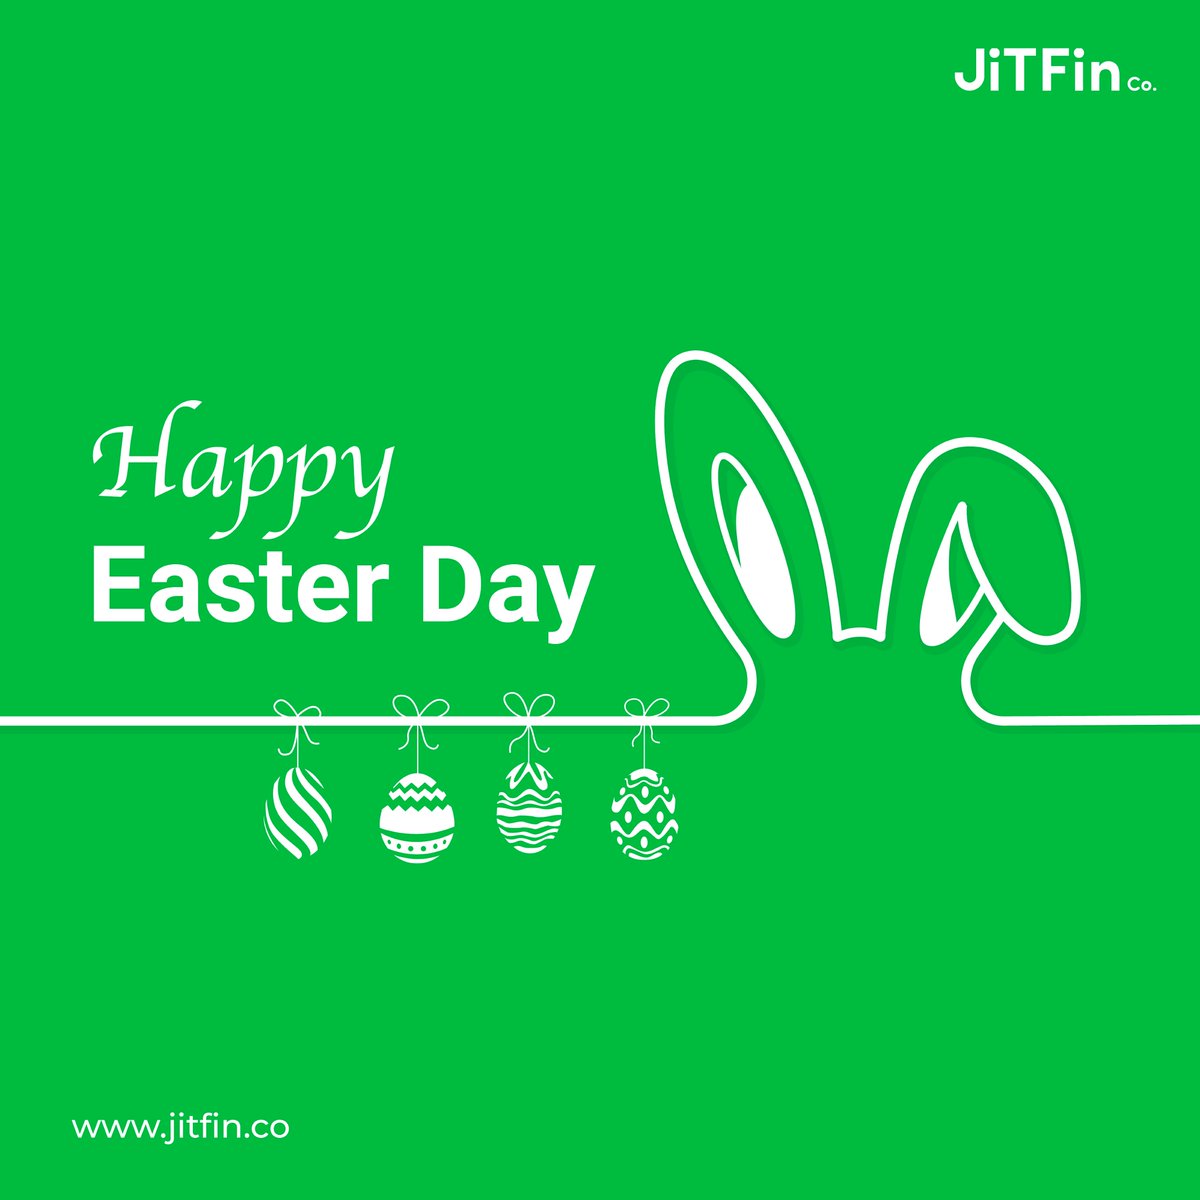 Have a blessed and happy Easter.

#msmeloans #smefunding #fintech #easter2023 #HappyEaster #EasterSunday